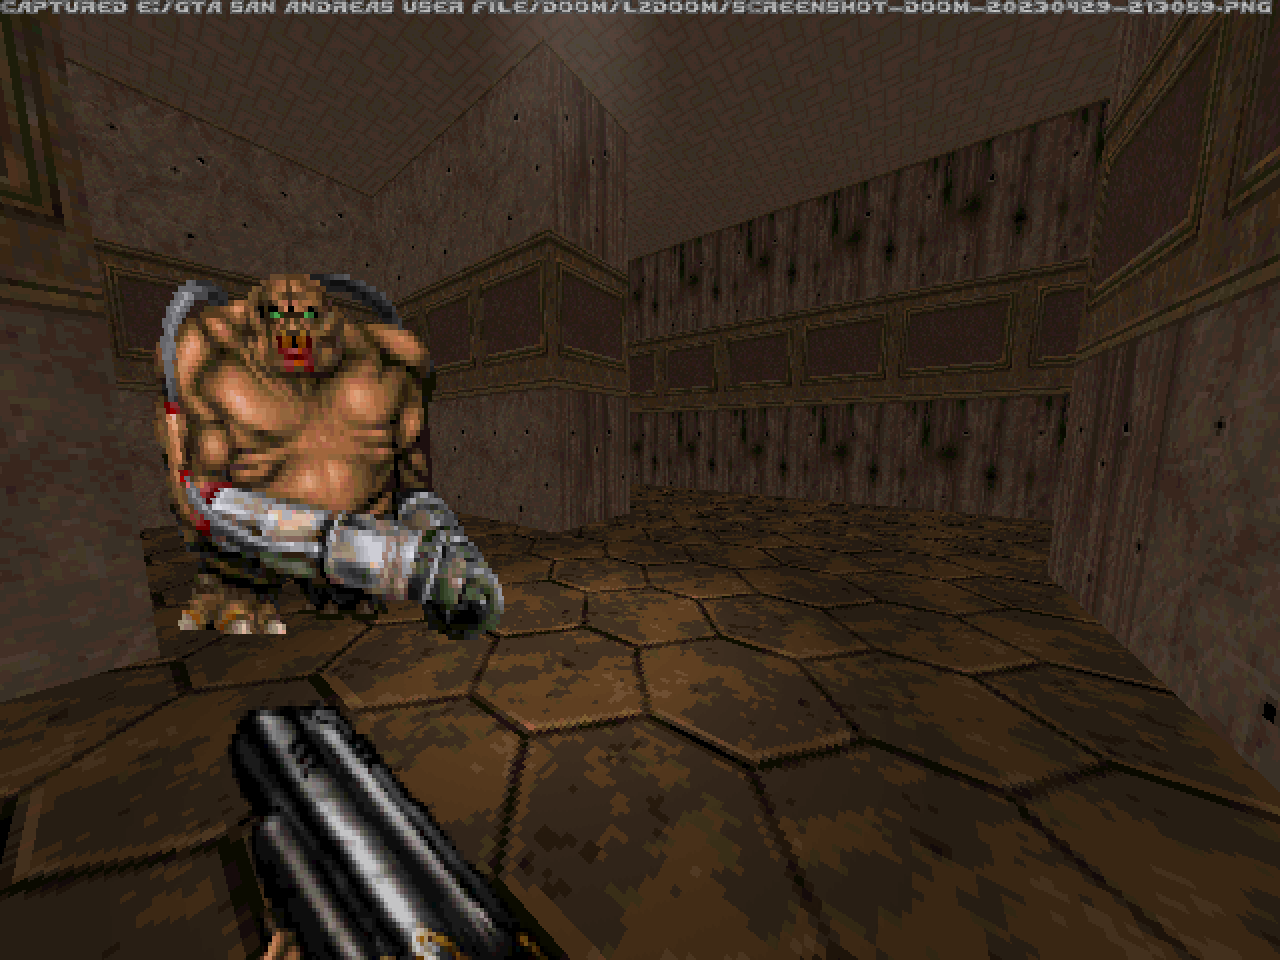 doom project brutality 3.0 install